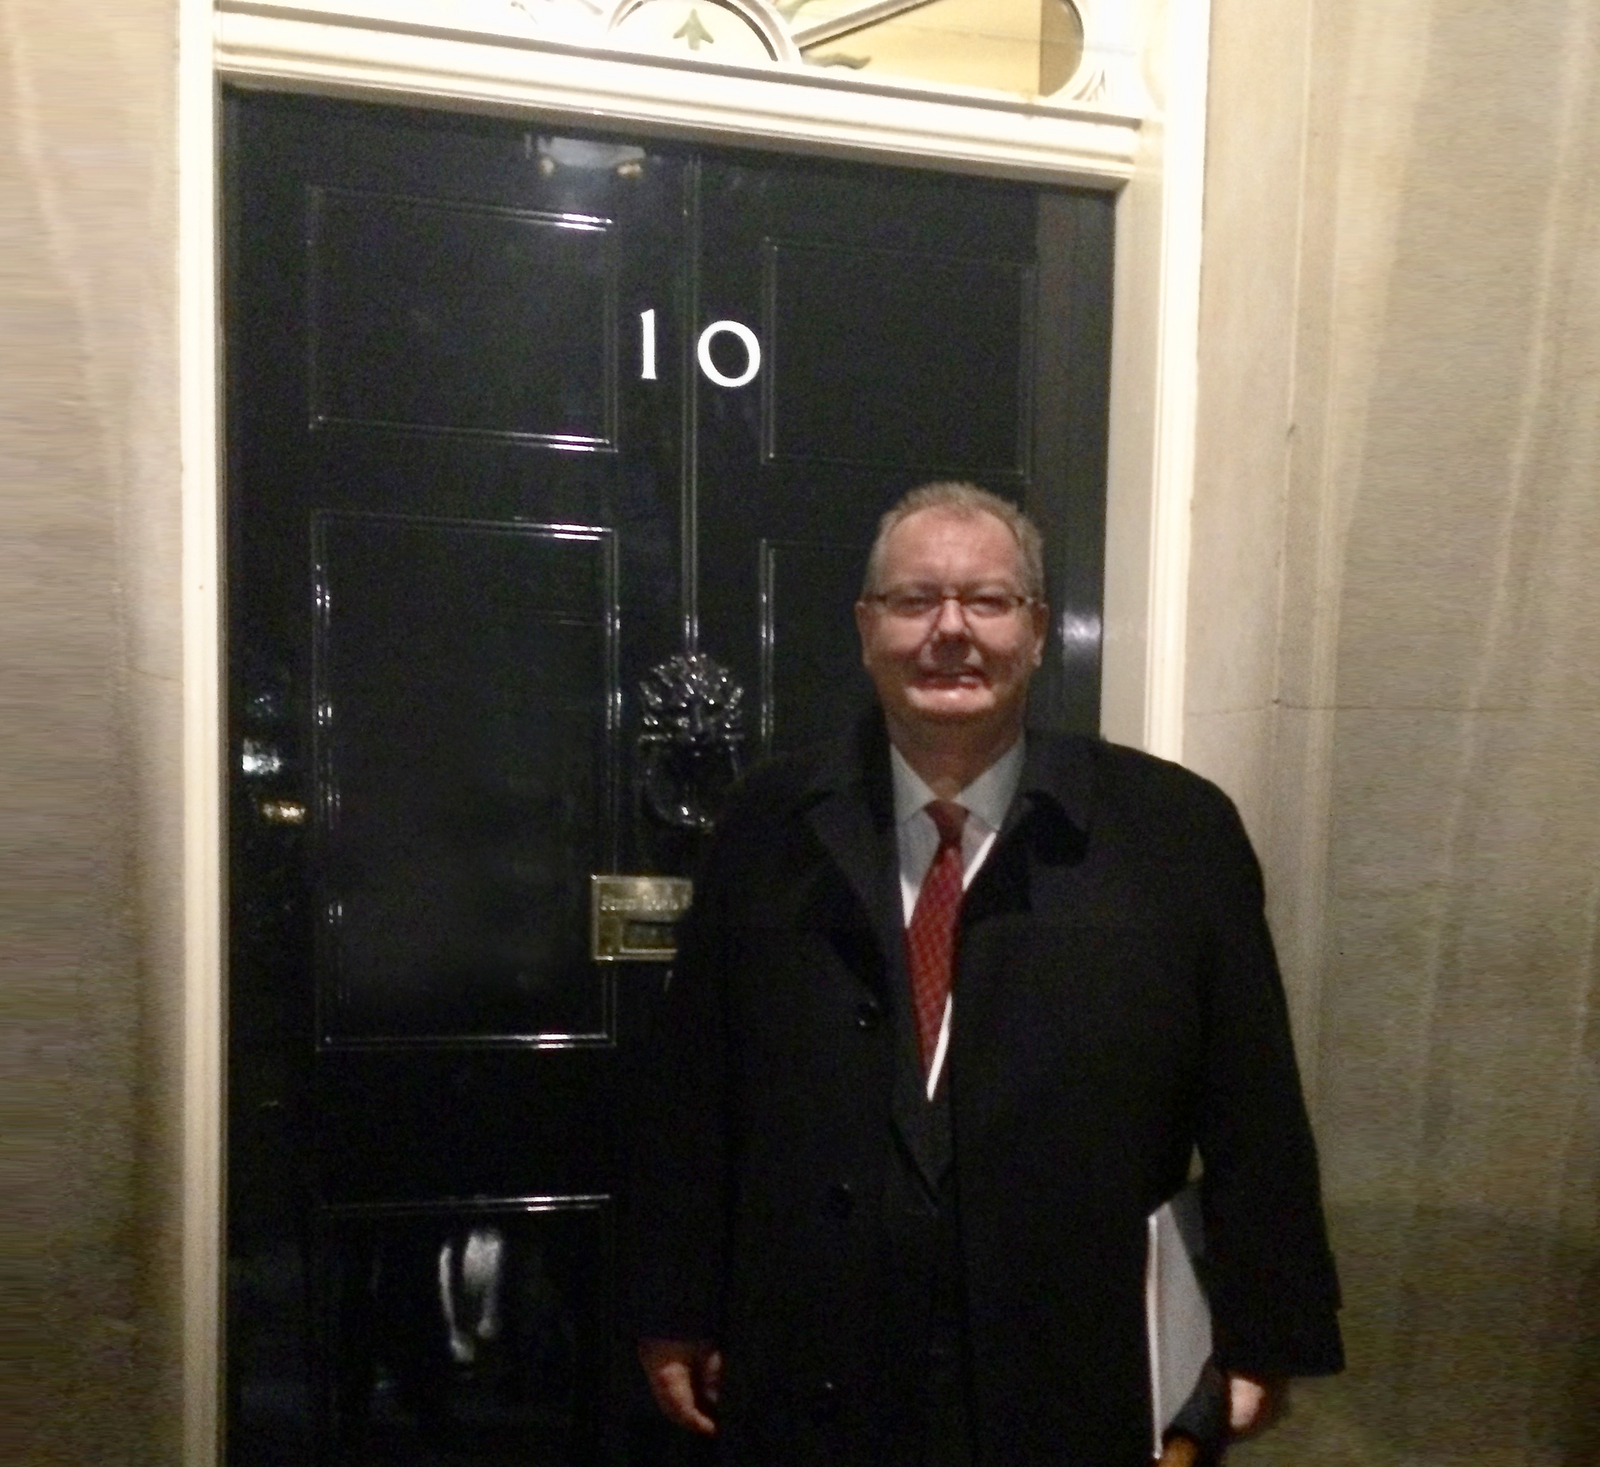 Doing business at No. 10